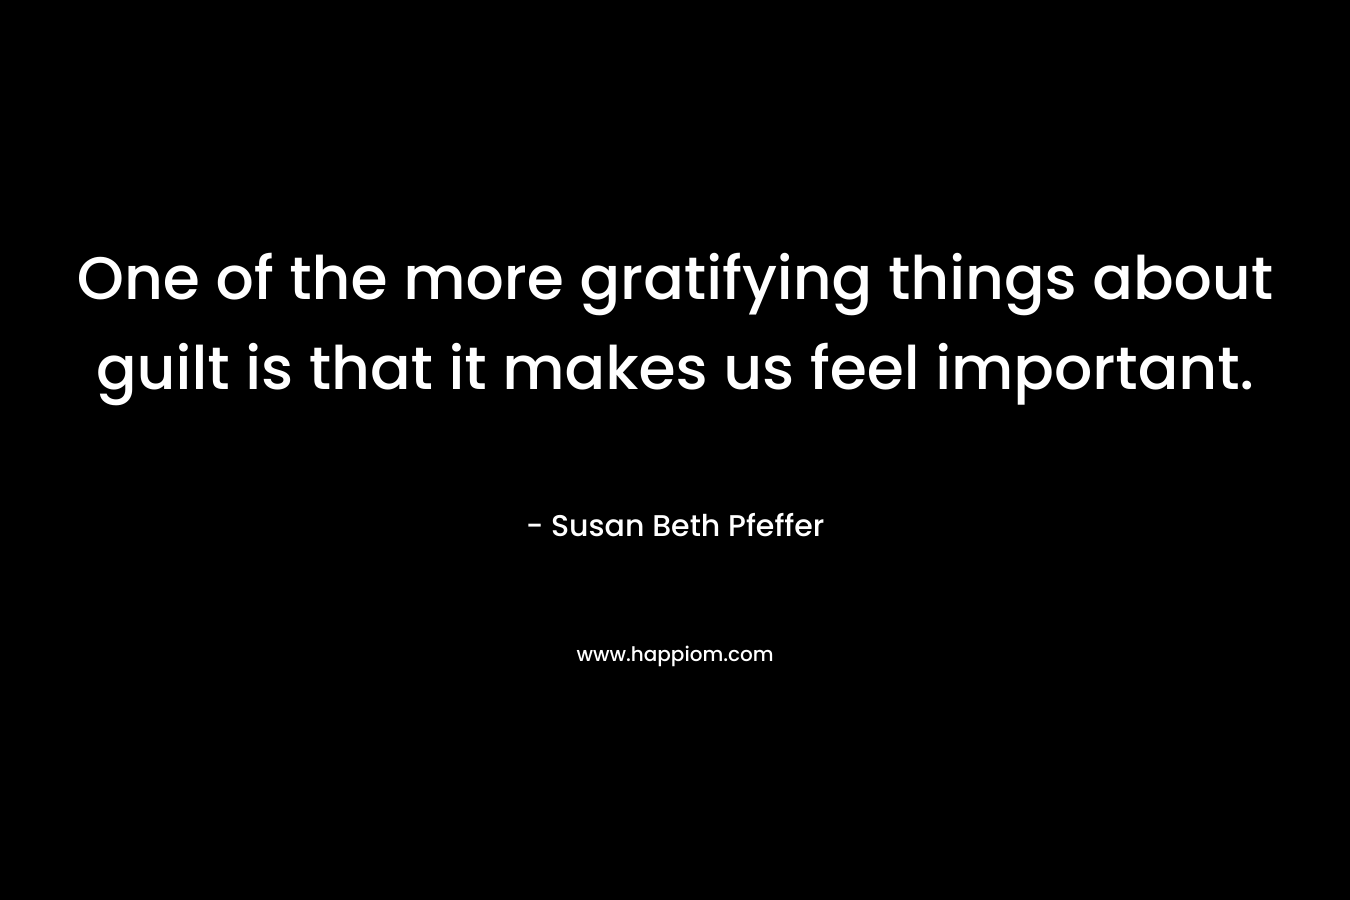 One of the more gratifying things about guilt is that it makes us feel important. – Susan Beth Pfeffer